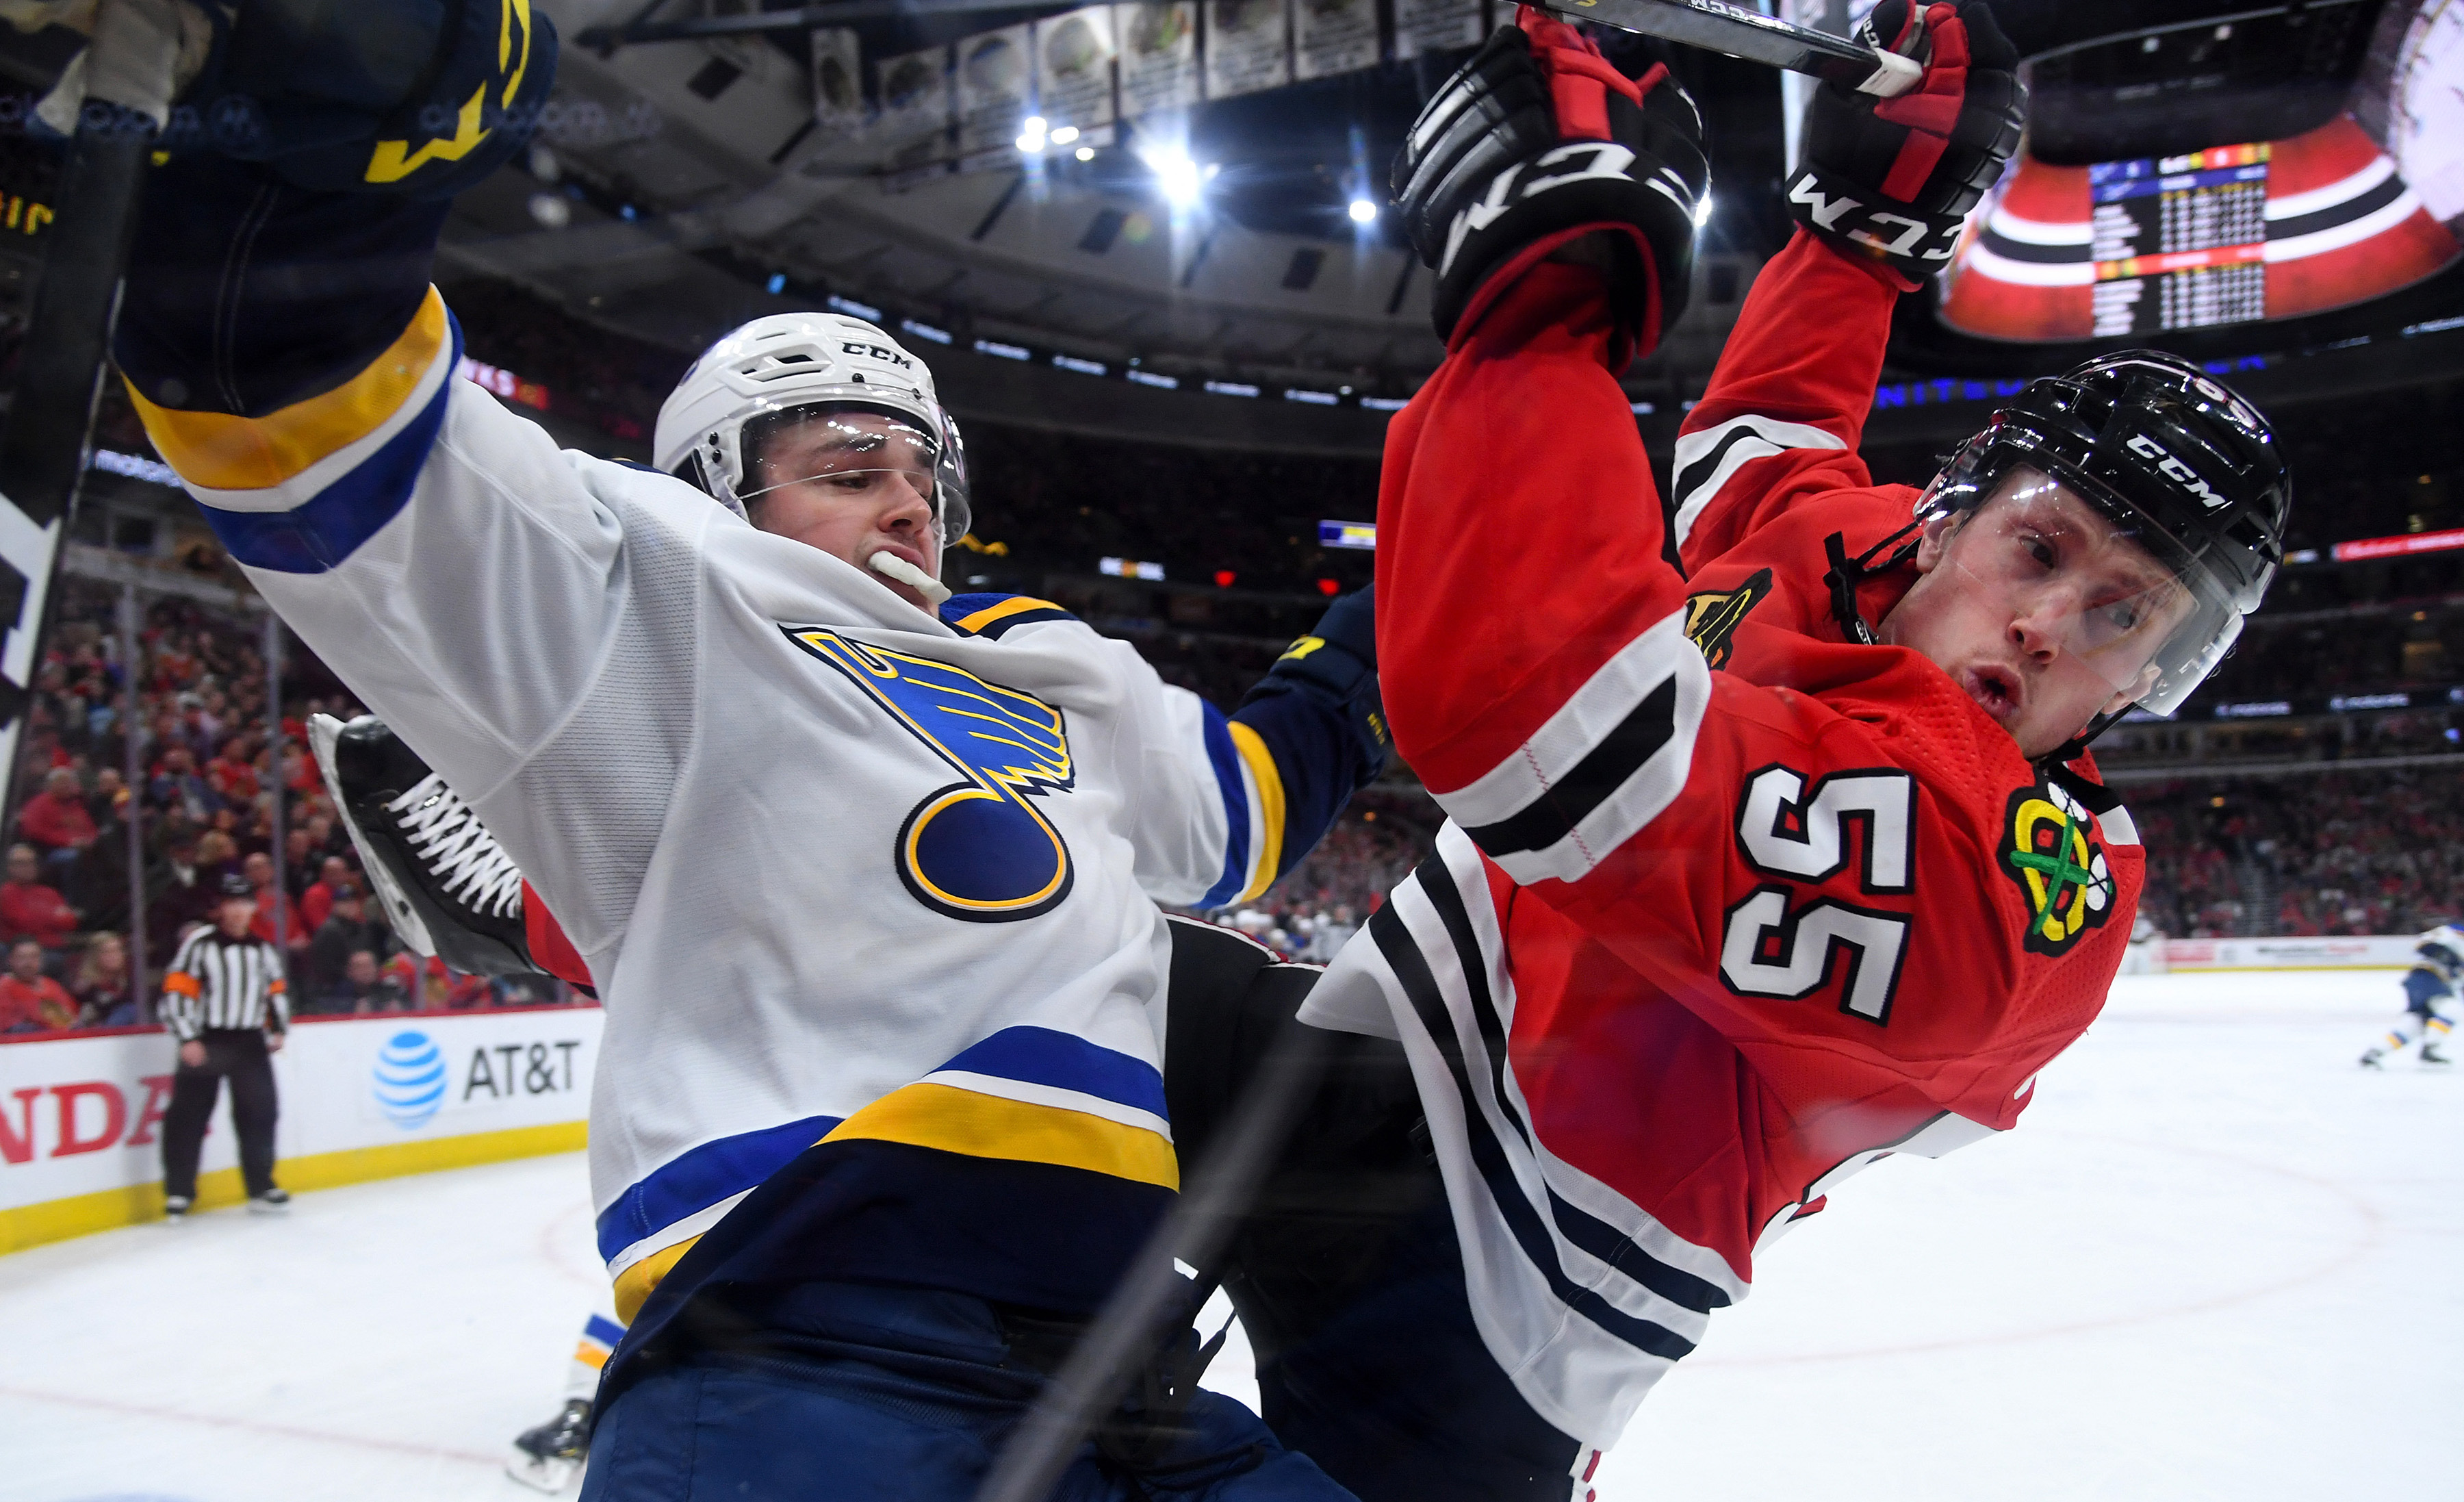 Blackhawks prepare for Game 4 without top defenseman